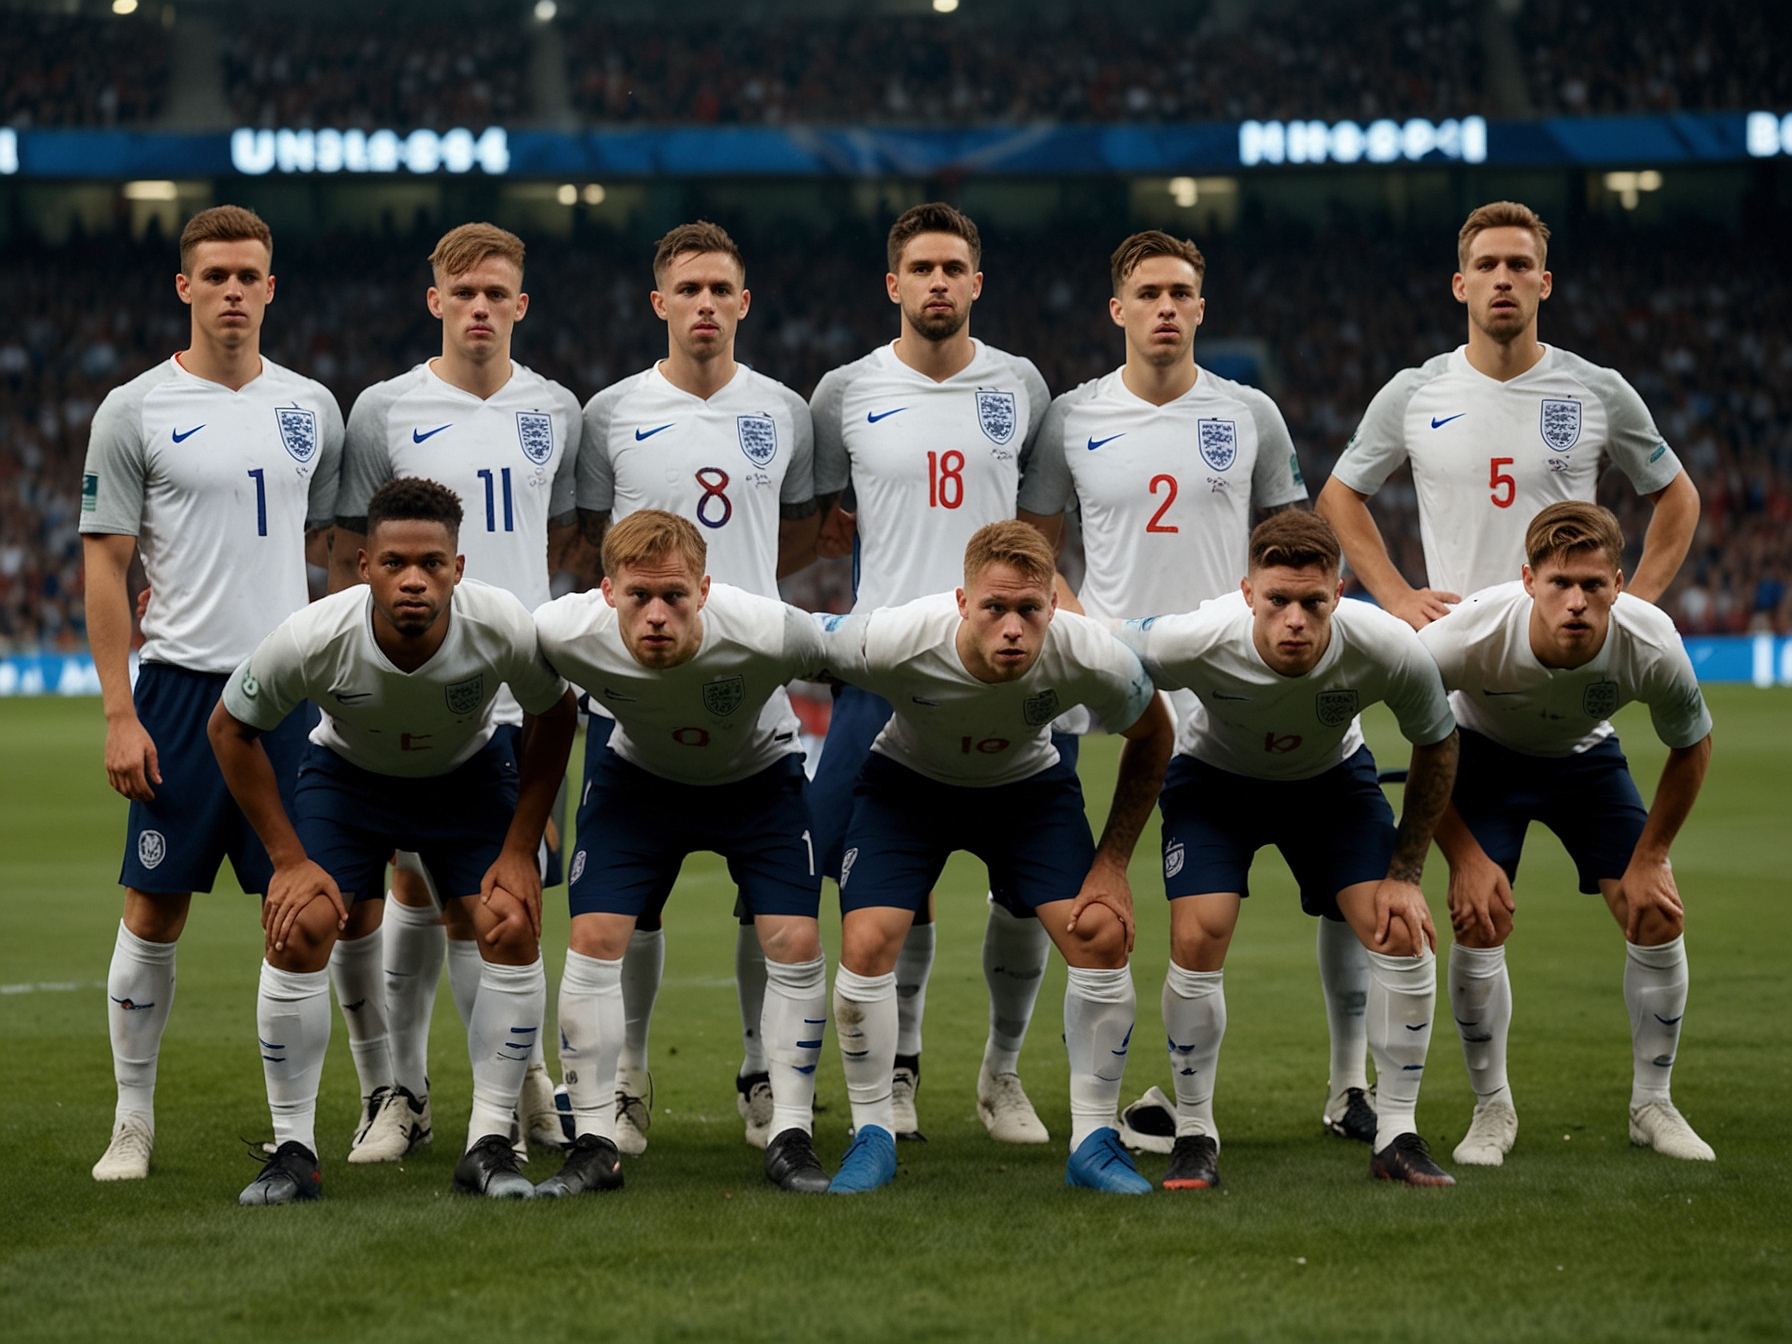 England football team displaying lack of cohesion on the field, with key players appearing disjointed during the crucial match at Euro 2024 in Gelsenkirchen, Germany.